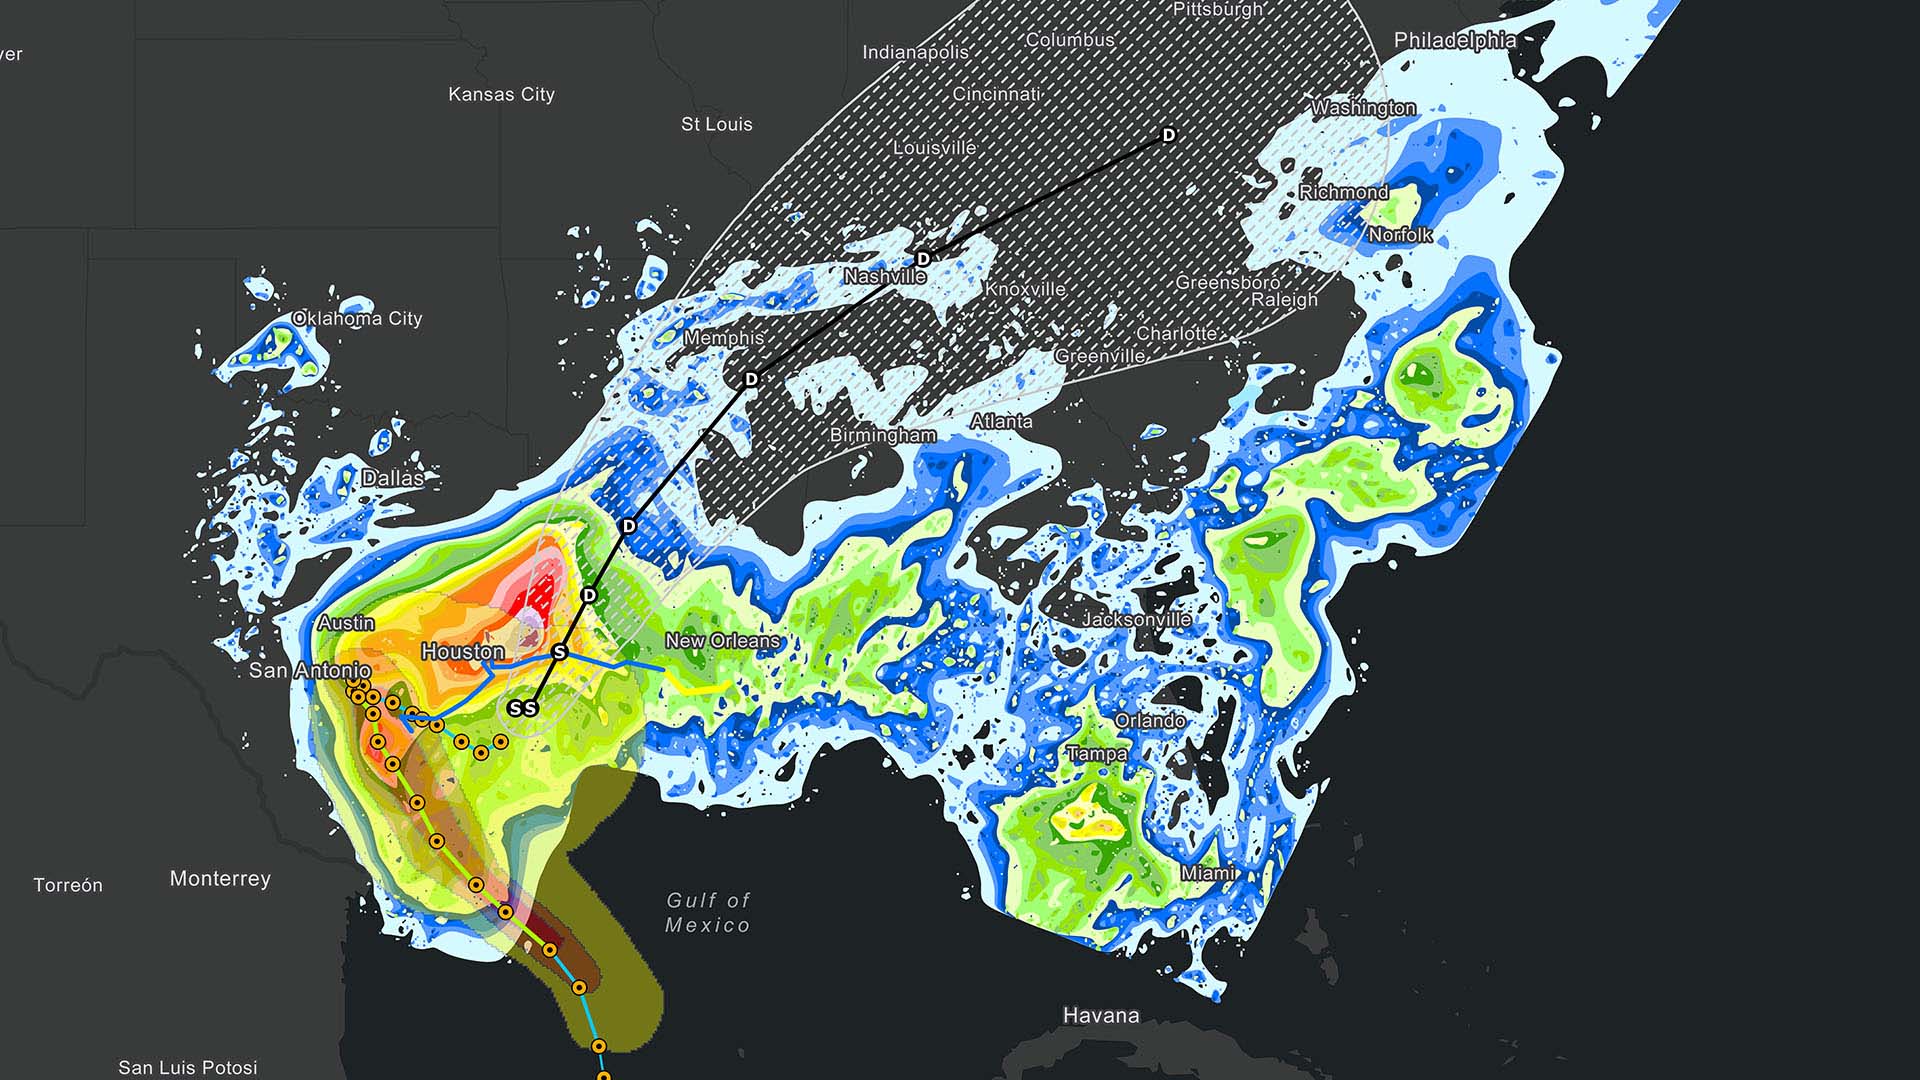 Tracking climate risk with maps of storms and hazards